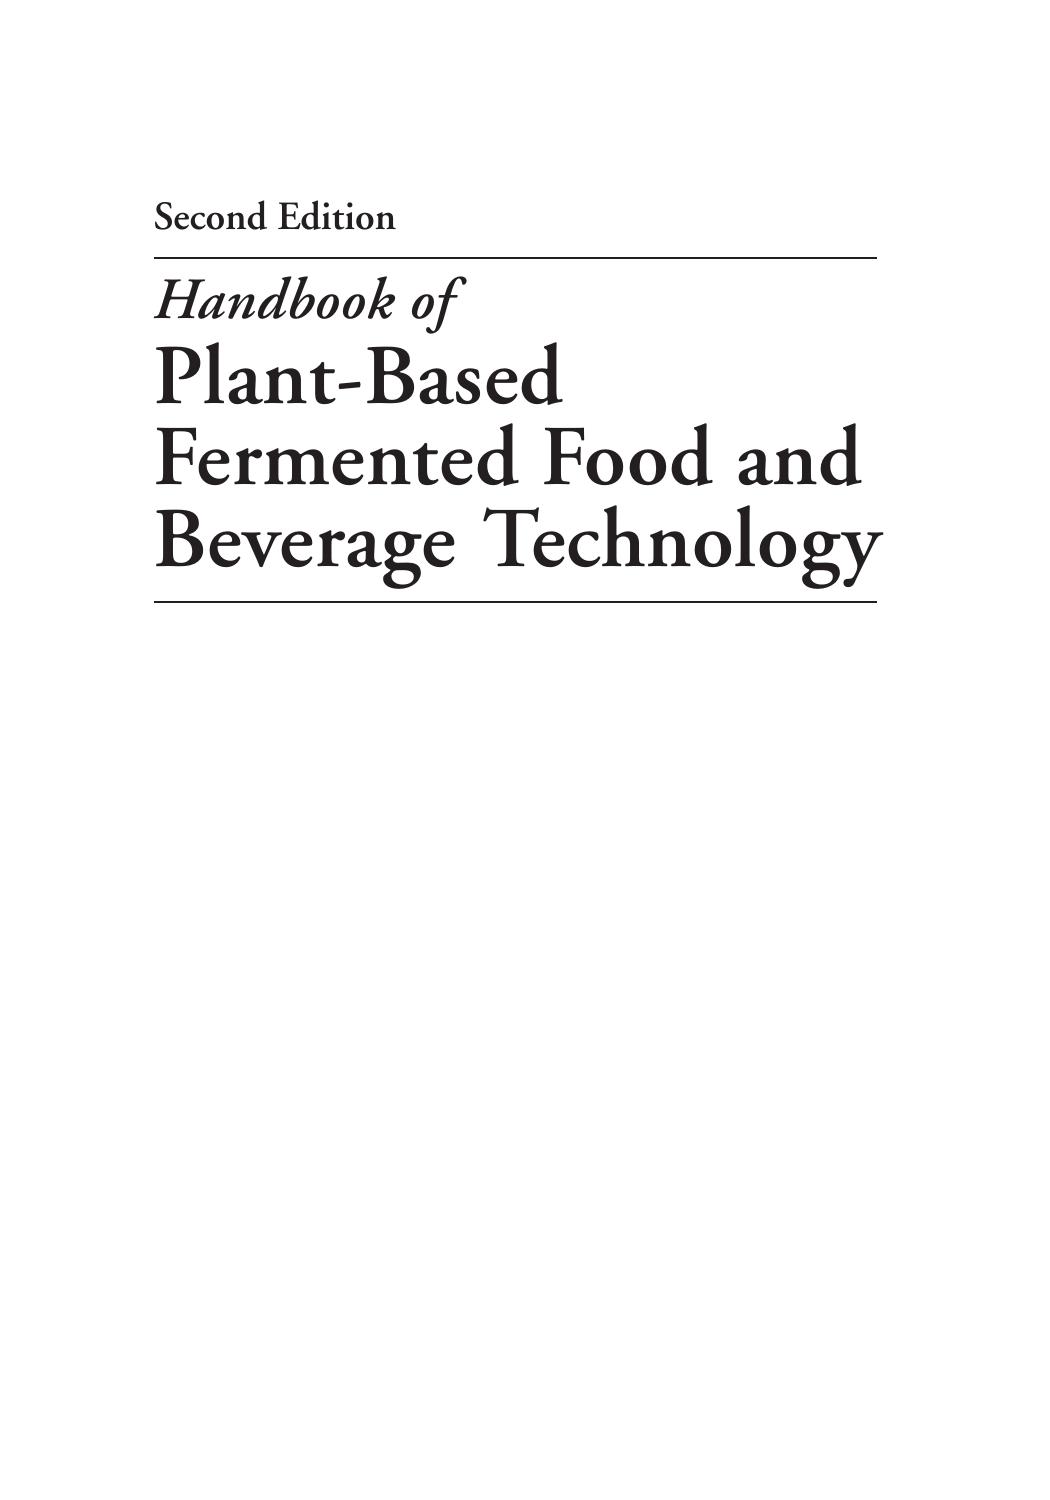 Handbook of Fermented Food and Beverage Technology, Second Edition- Handbook of Plant-Based Fermented Food and Beverage Technology  2012